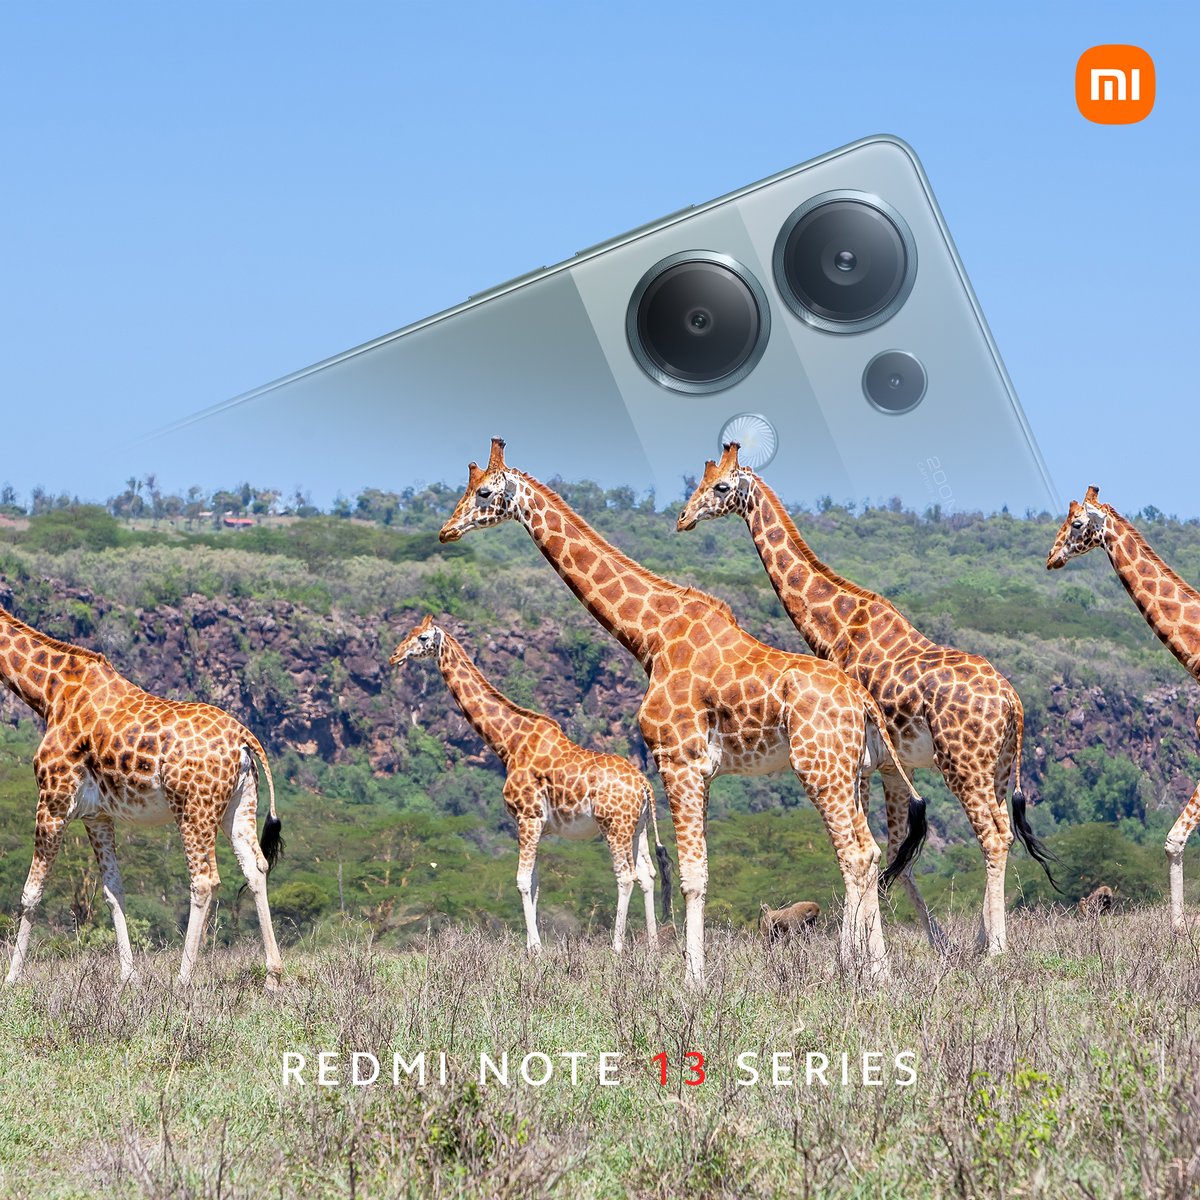 Iconic shots await with the #RedmiNote13Series. Experience unparalleled clarity through its advanced 200MP OIS camera. 

#EveryShotIconic